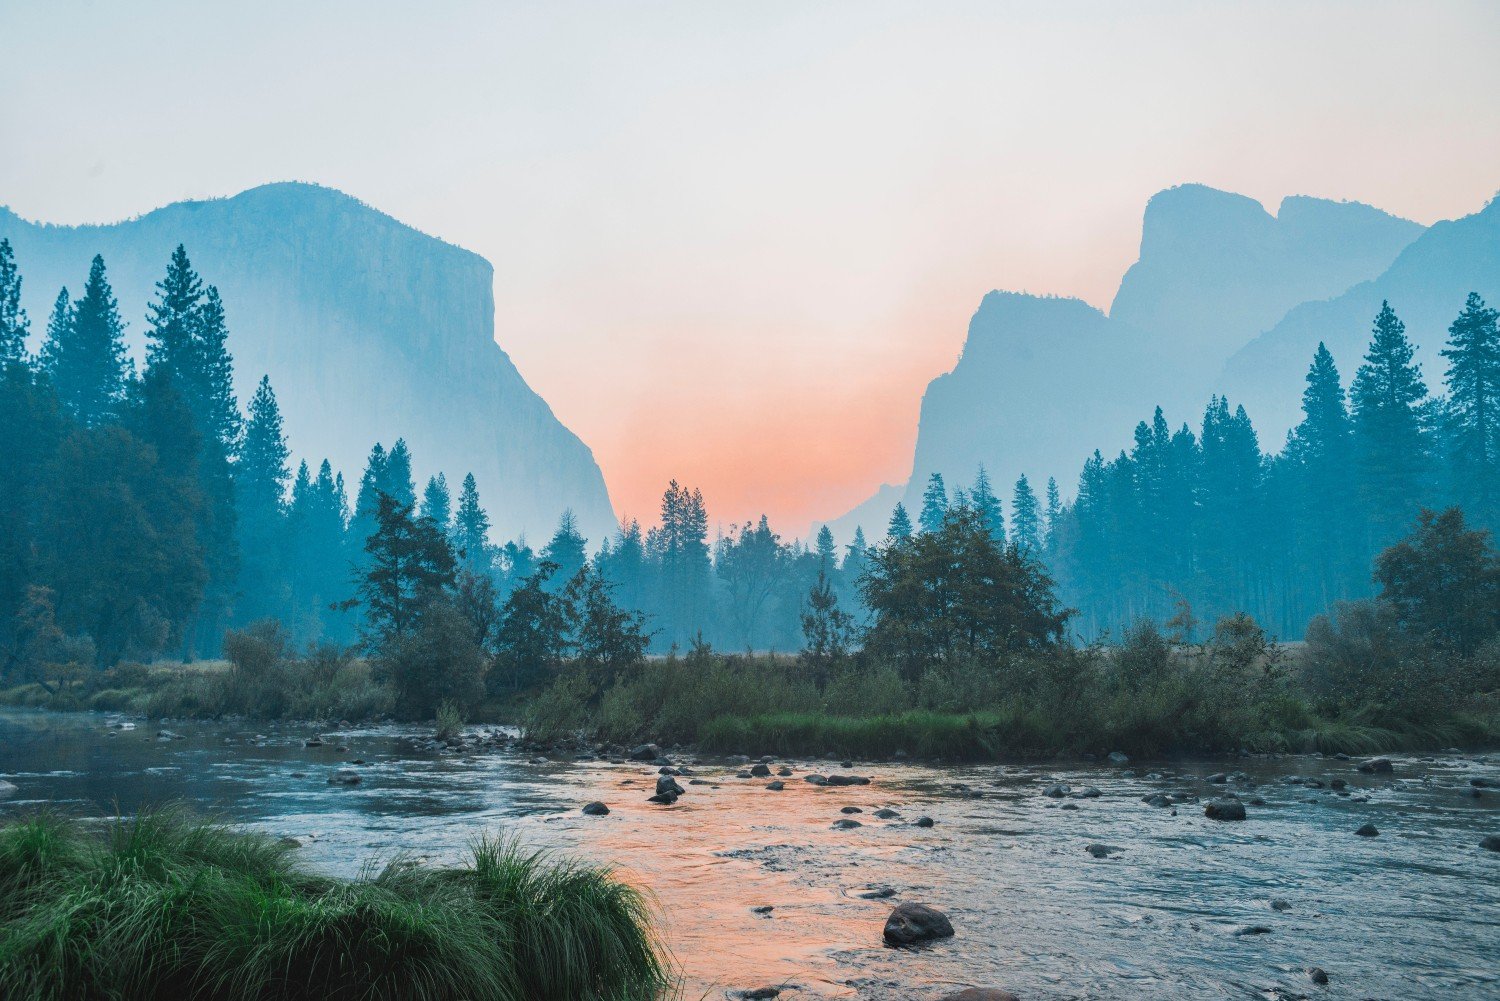 How to Get to Yosemite National Park by Bus, Train, or Plane